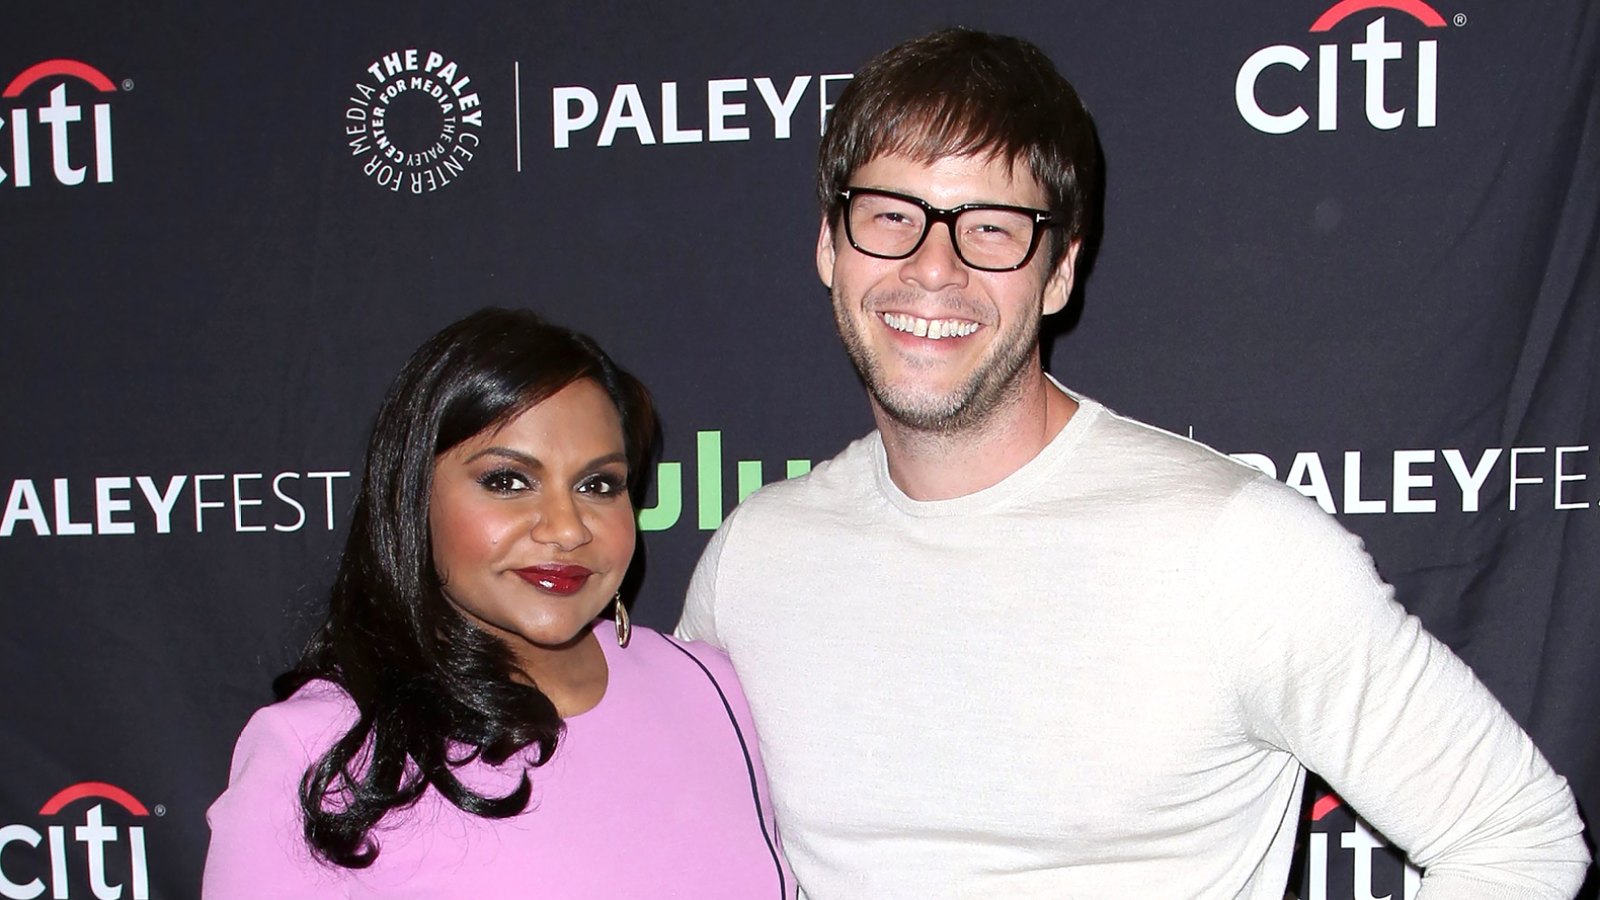 Mindy Kaling Bakes Chocolate Chip Cookies With Help From Ike Barinholtz